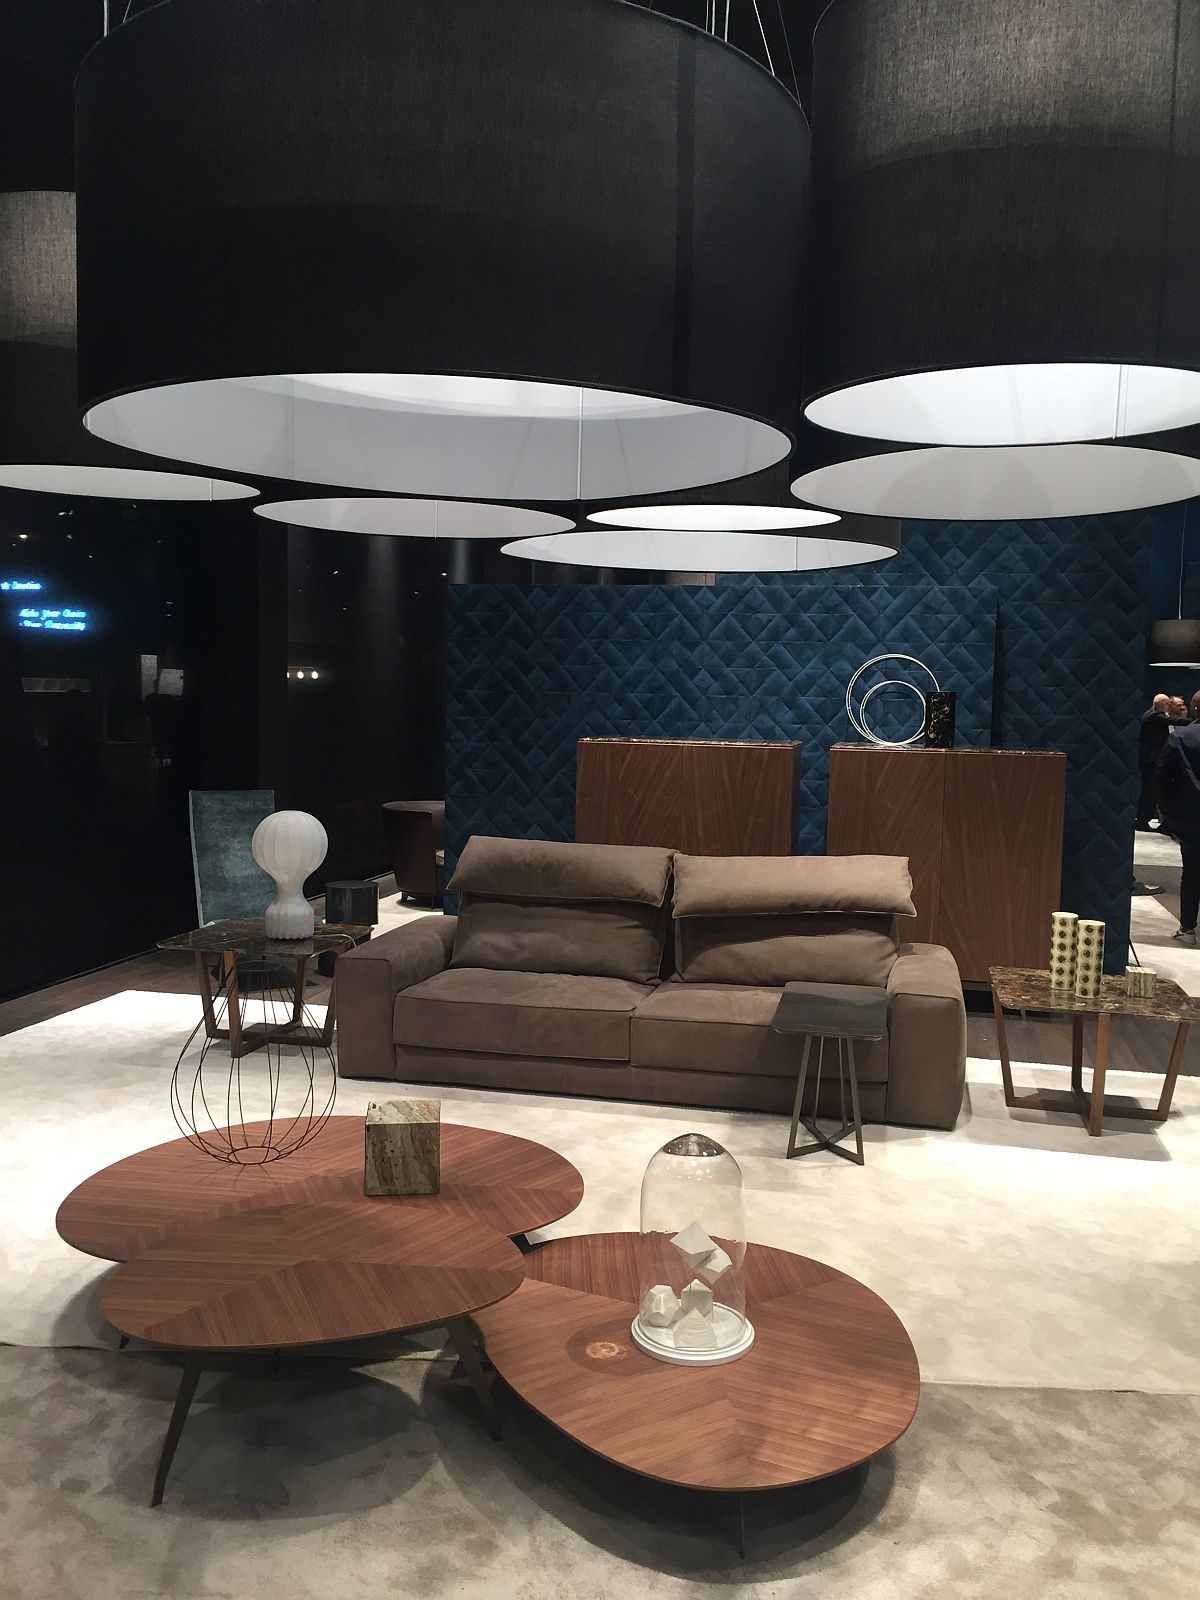 Ingenious use of coffe tables to create a cool focal point in the living room - Alberta Salotti at Milan 2016